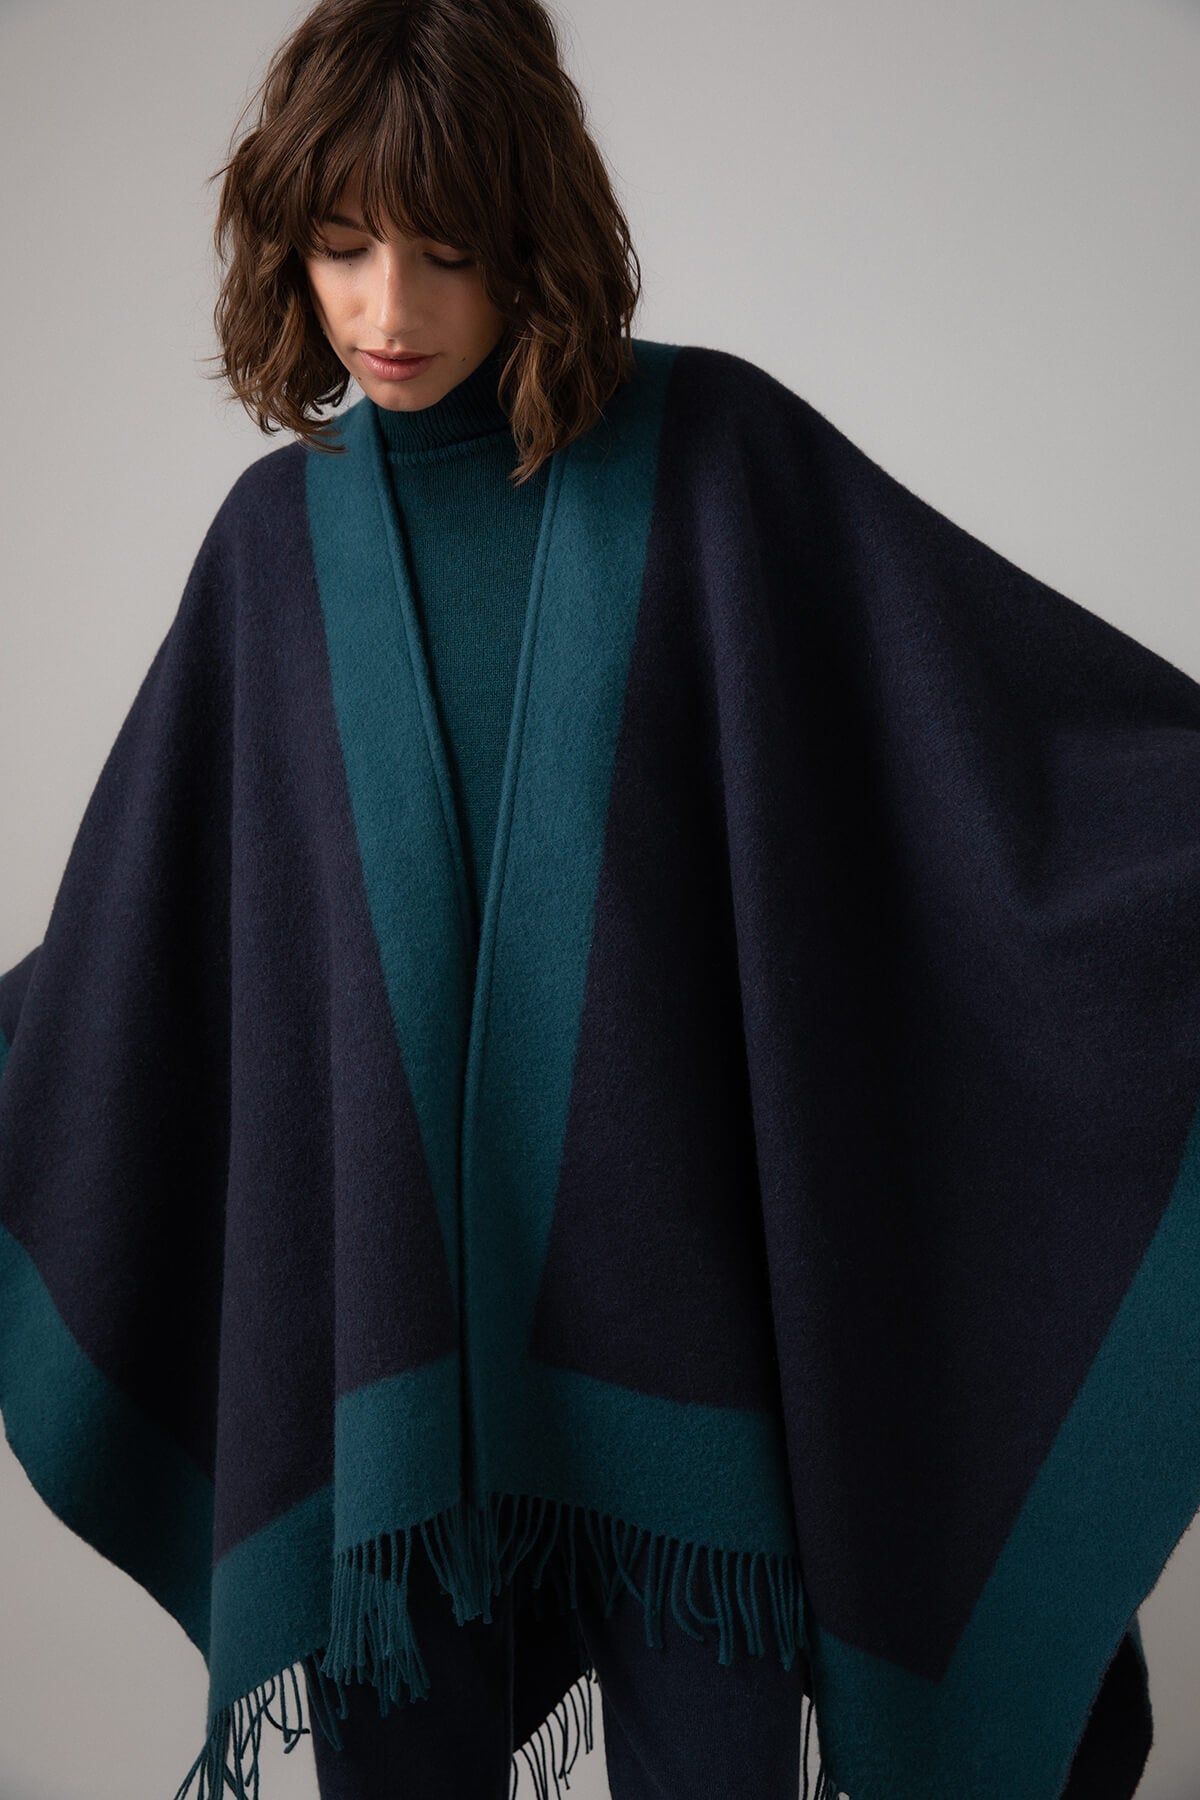 Model wearing Johnstons of Elgin Merino Wool Cape with Contrast Border in Mallard worn matching sweater and Mazarine Joggers on a grey background TD000230RU7358ONE